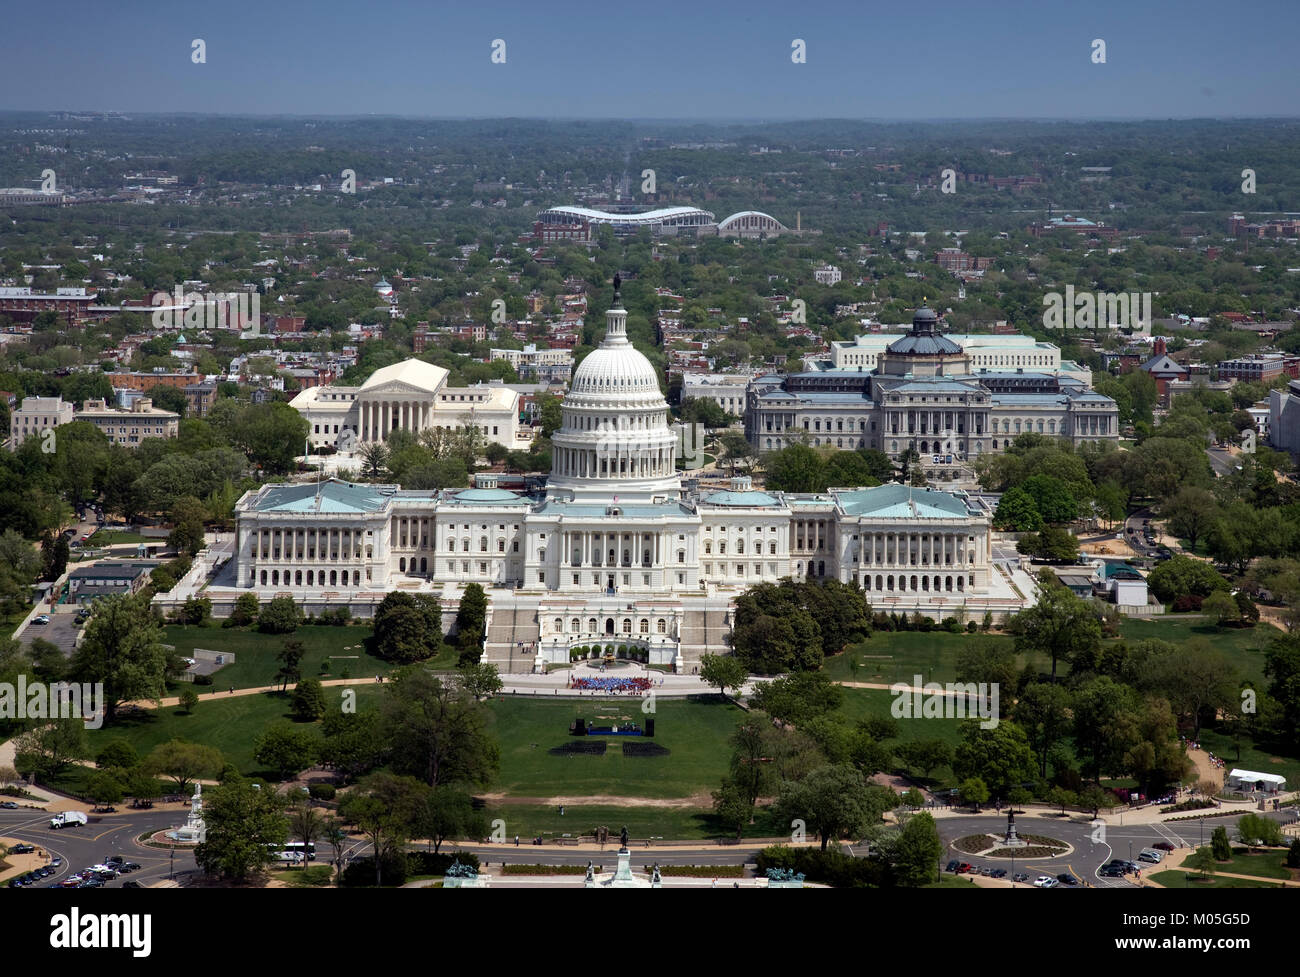 Aerial view, United States Capitol building, Washington, D.C. Stock Photo